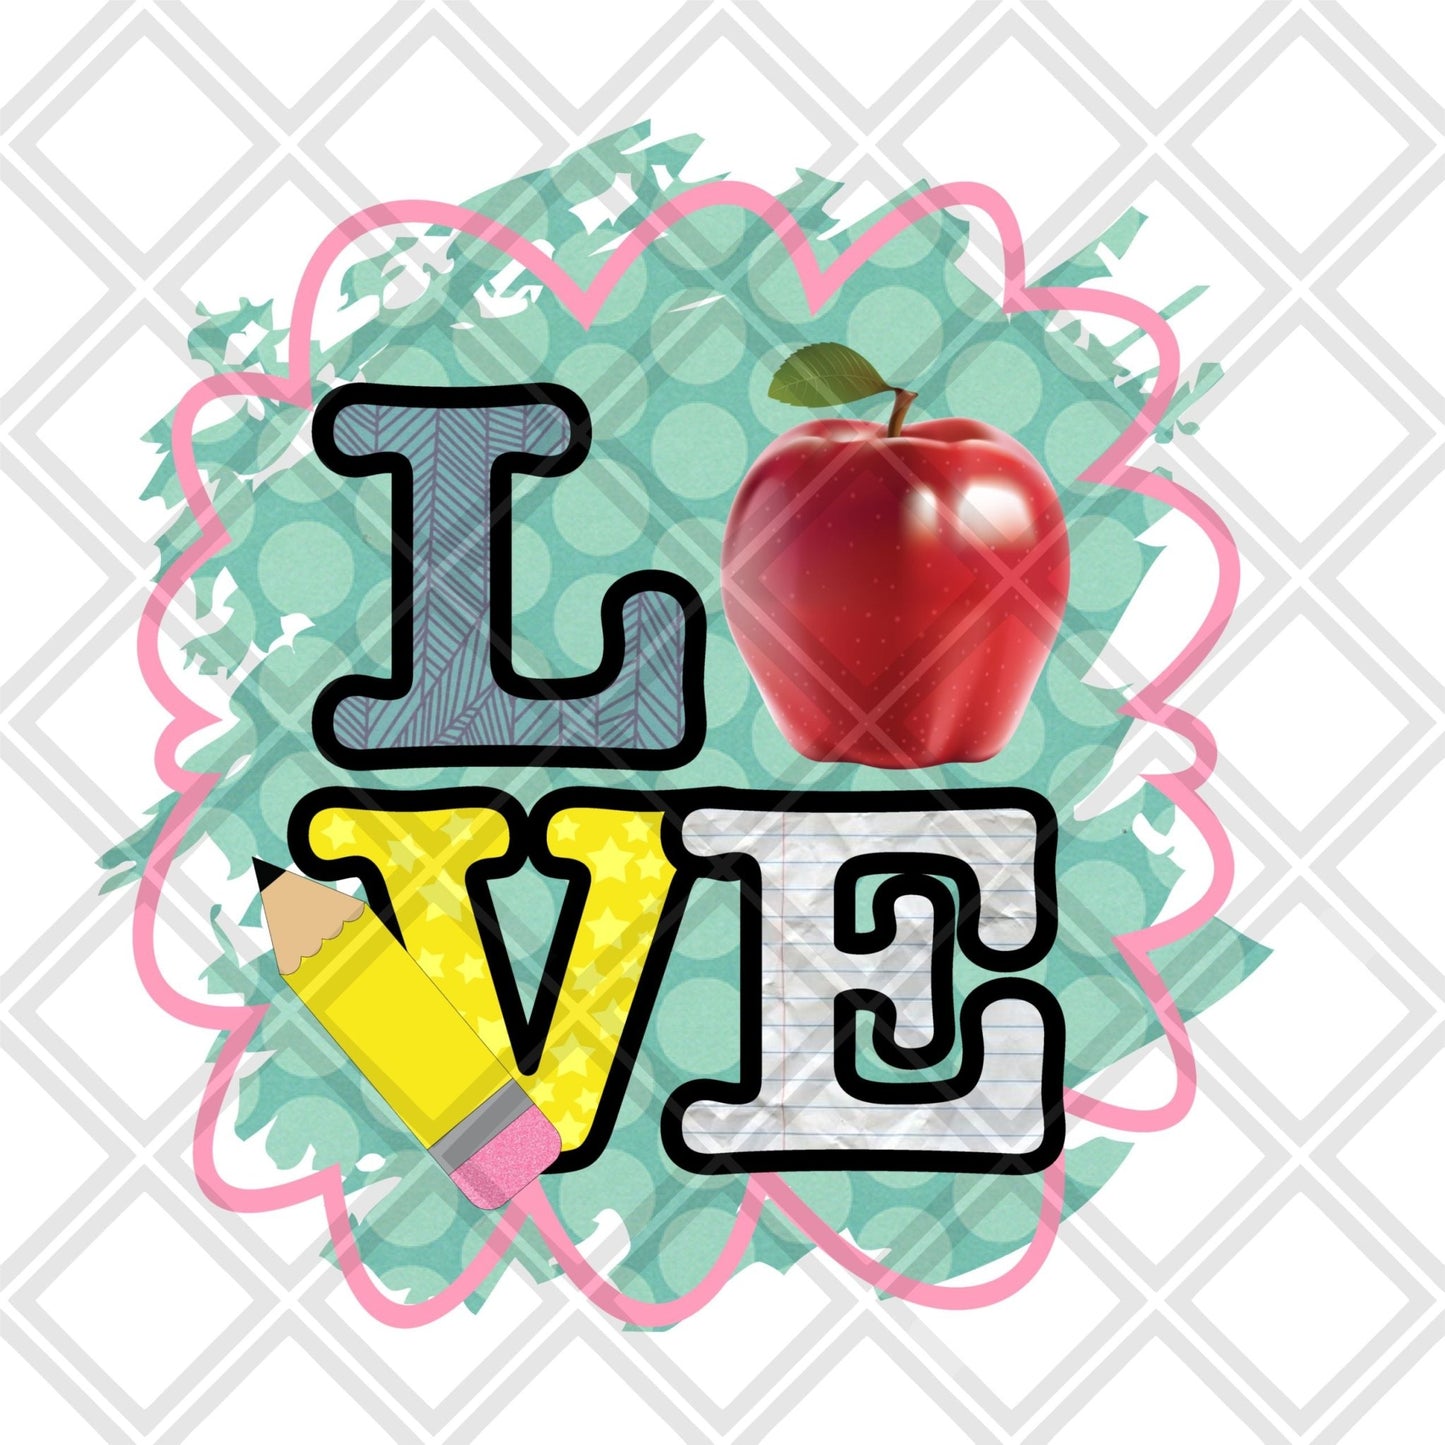 Love Pencil school apple frame png Digital Download Instand Download - Do it yourself Transfers